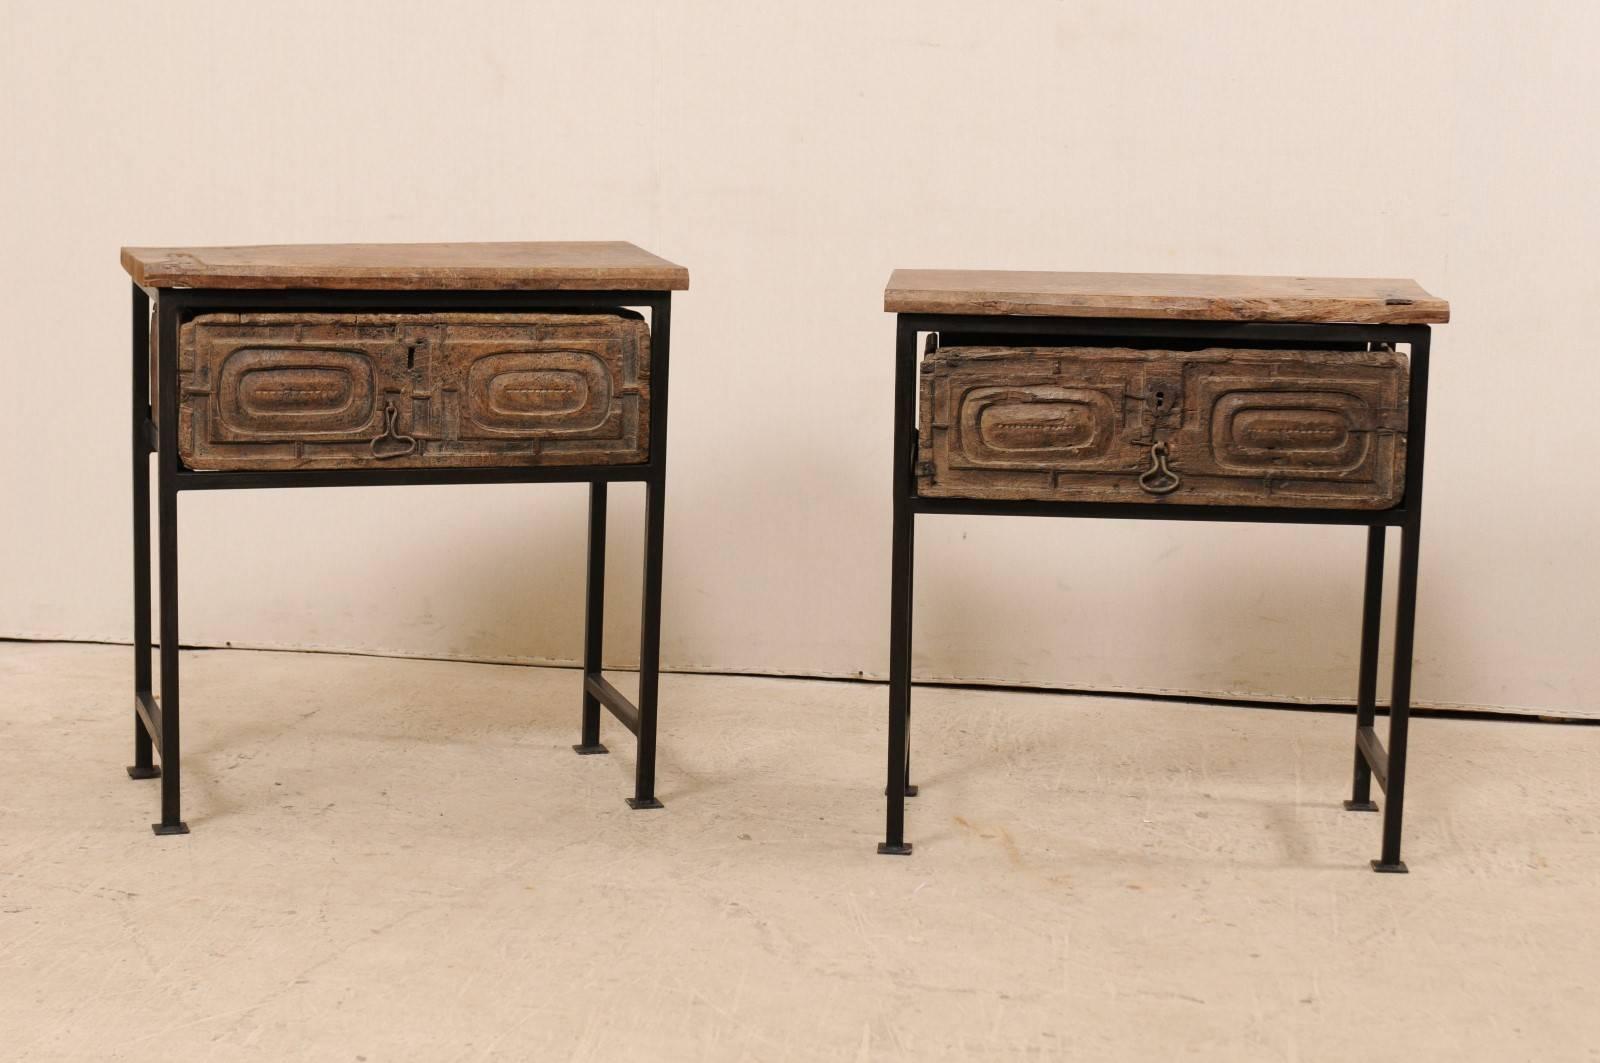 A pair of unique 18th century Spanish chests or tables. This pair of 18th century (or earlier) Spanish drawers have been set into a custom iron base and older wood tops to produce this fantastic pair of statement pieces. The tops and drawers are a